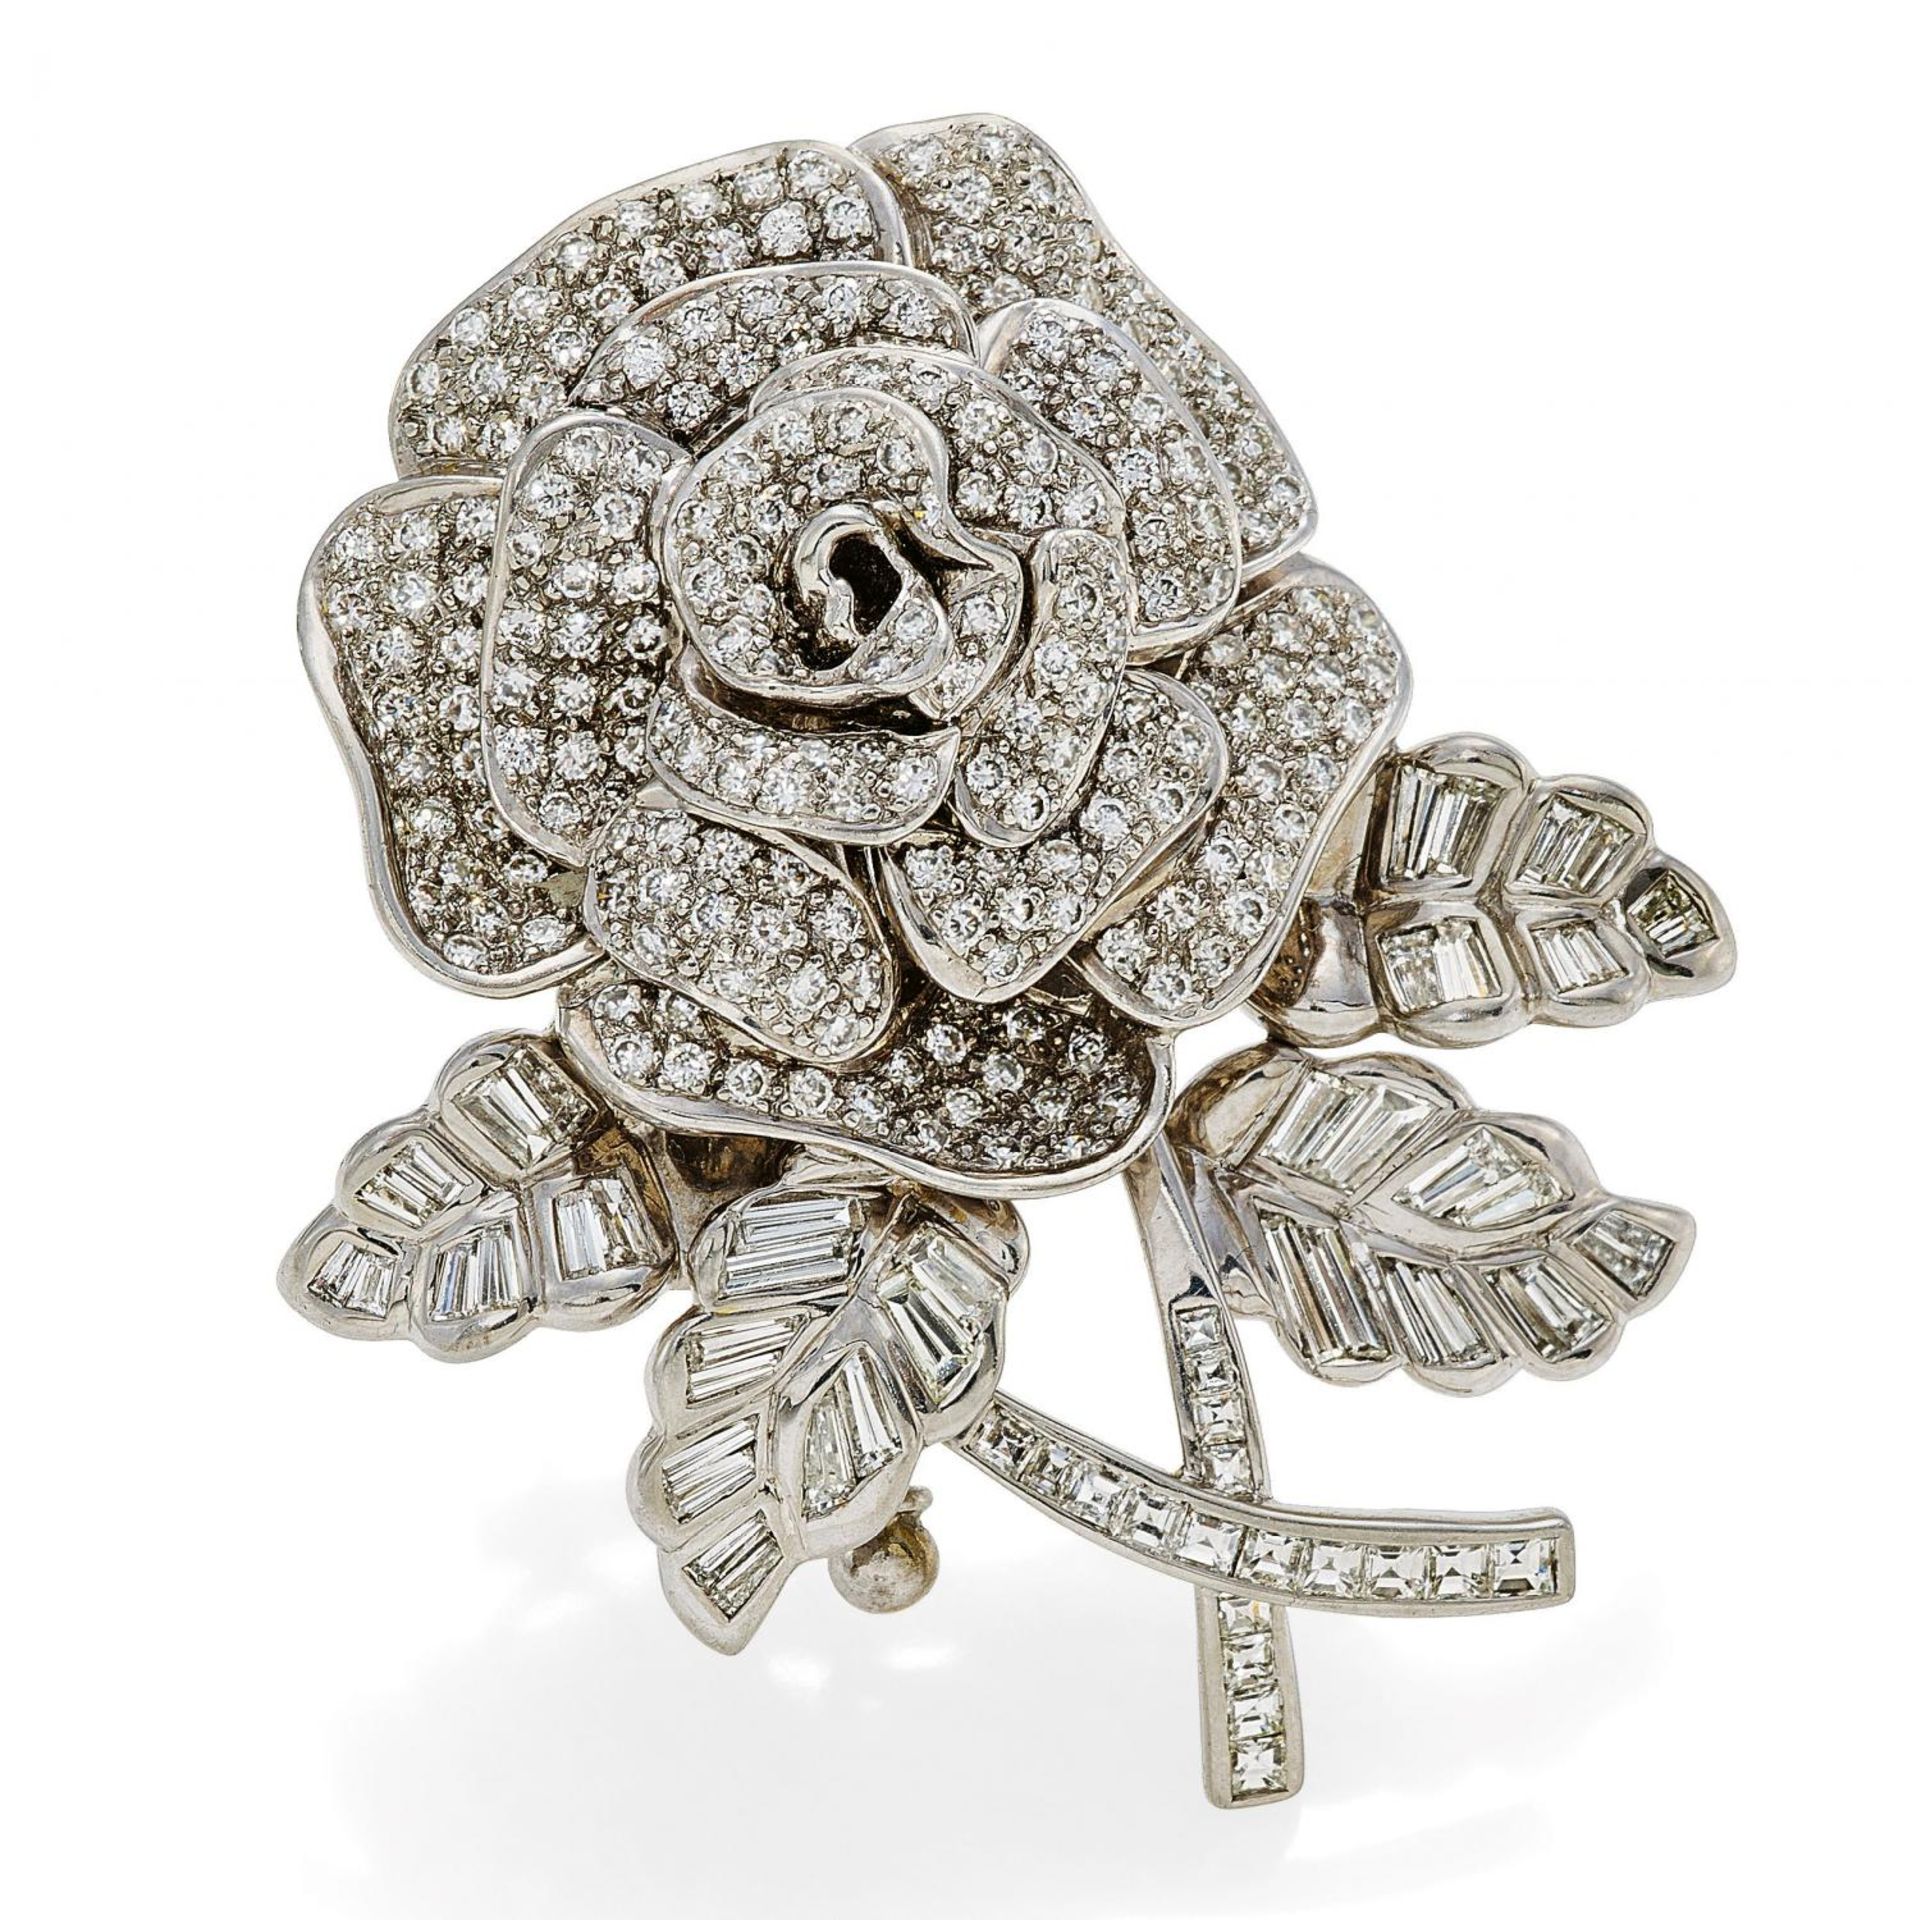 DIAMOND-BROOCH. Material: Platinum, with mark, pin 750/- white gold. Total Weight: ca. 42,5 g.